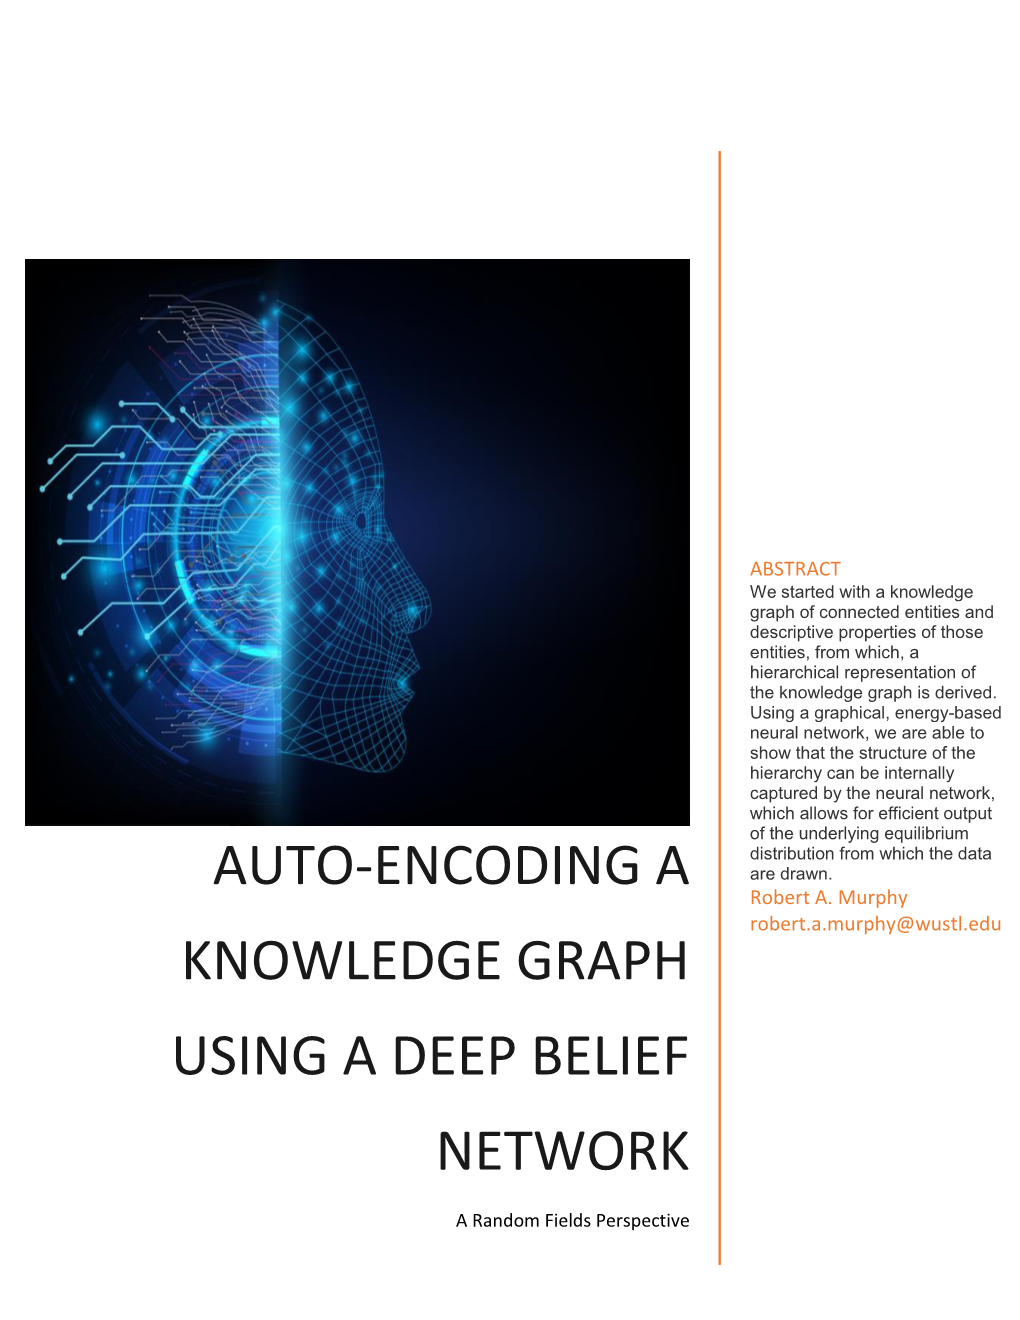 Auto-Encoding a Knowledge Graph Using a Deep Belief Network